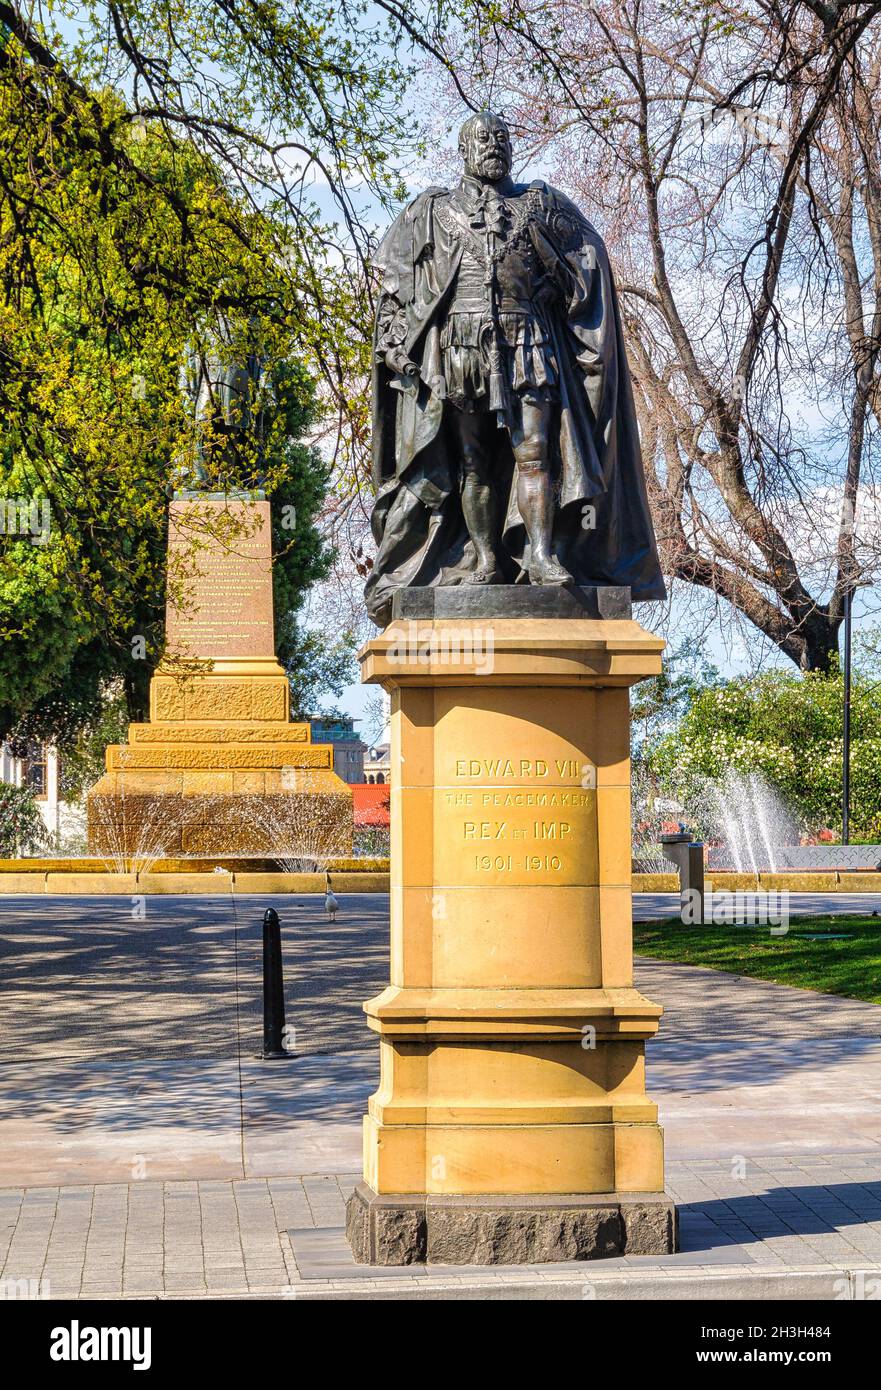 The statue of King Edward VII, The Peacemaker, dressed in the robes of the Order of the Garter - Hobart, Tasmania, Australia Stock Photo